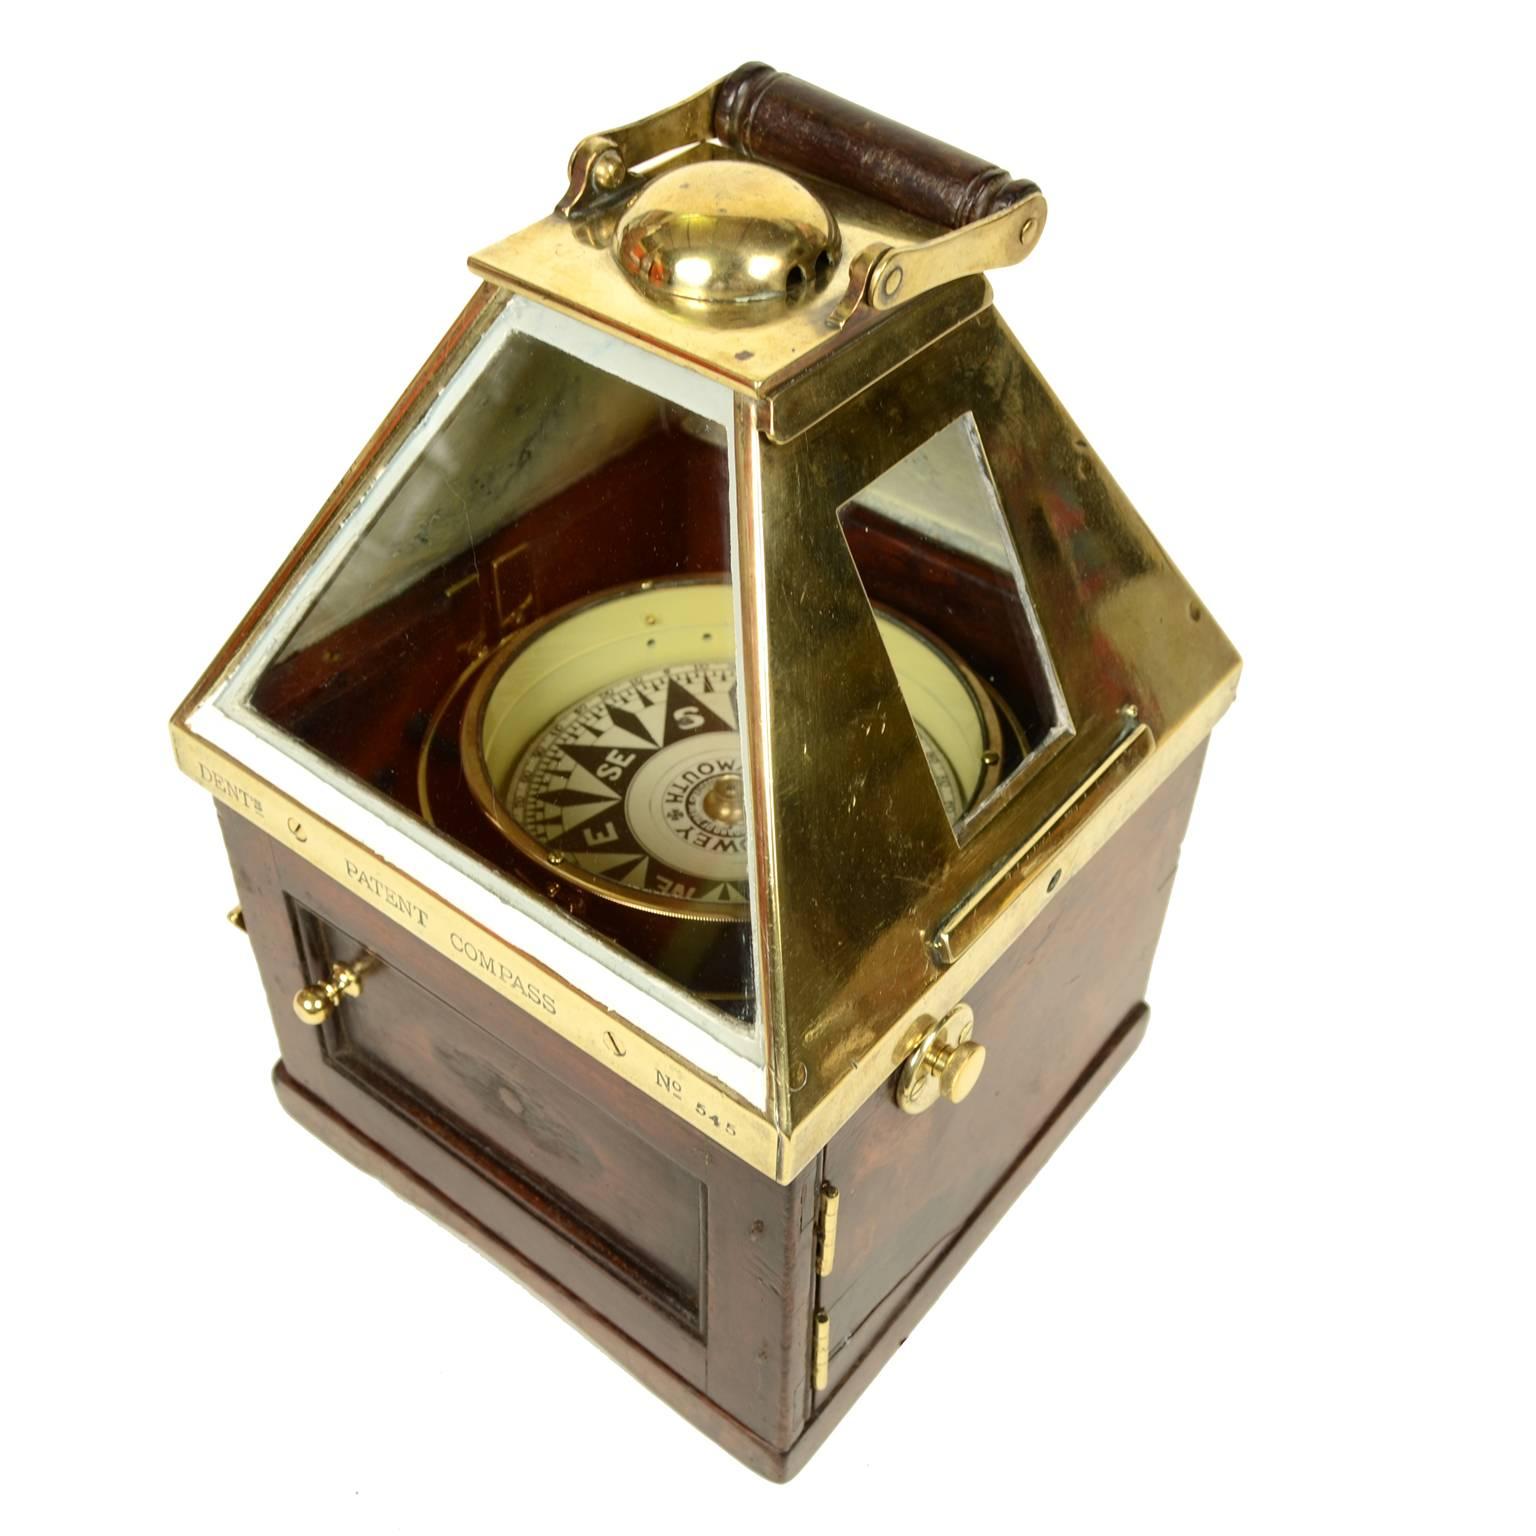 Rare and elegant binnacle compass made of mahogany and brass signed DENT's Patent COMPASS no. 545 with handle for transportation. Inside there is a dry compass signed J. Blowey plymouth mounted on universal joint placed in a mahogany case topped